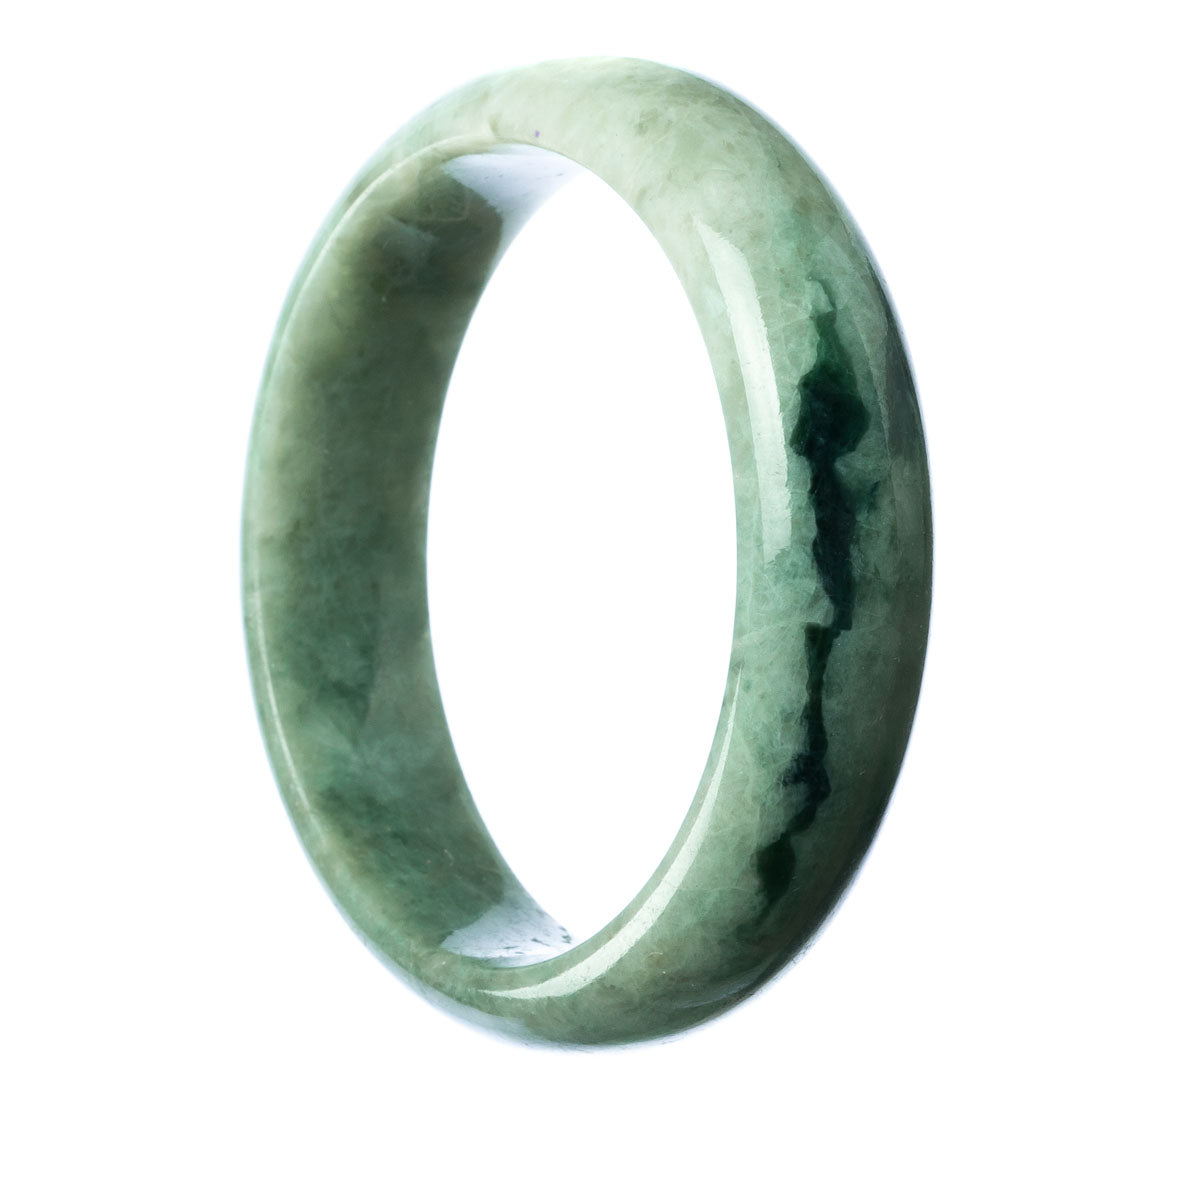 A half moon-shaped green jade bangle, made of real natural green jadeite jade, with a diameter of 62mm. Sold by MAYS GEMS.